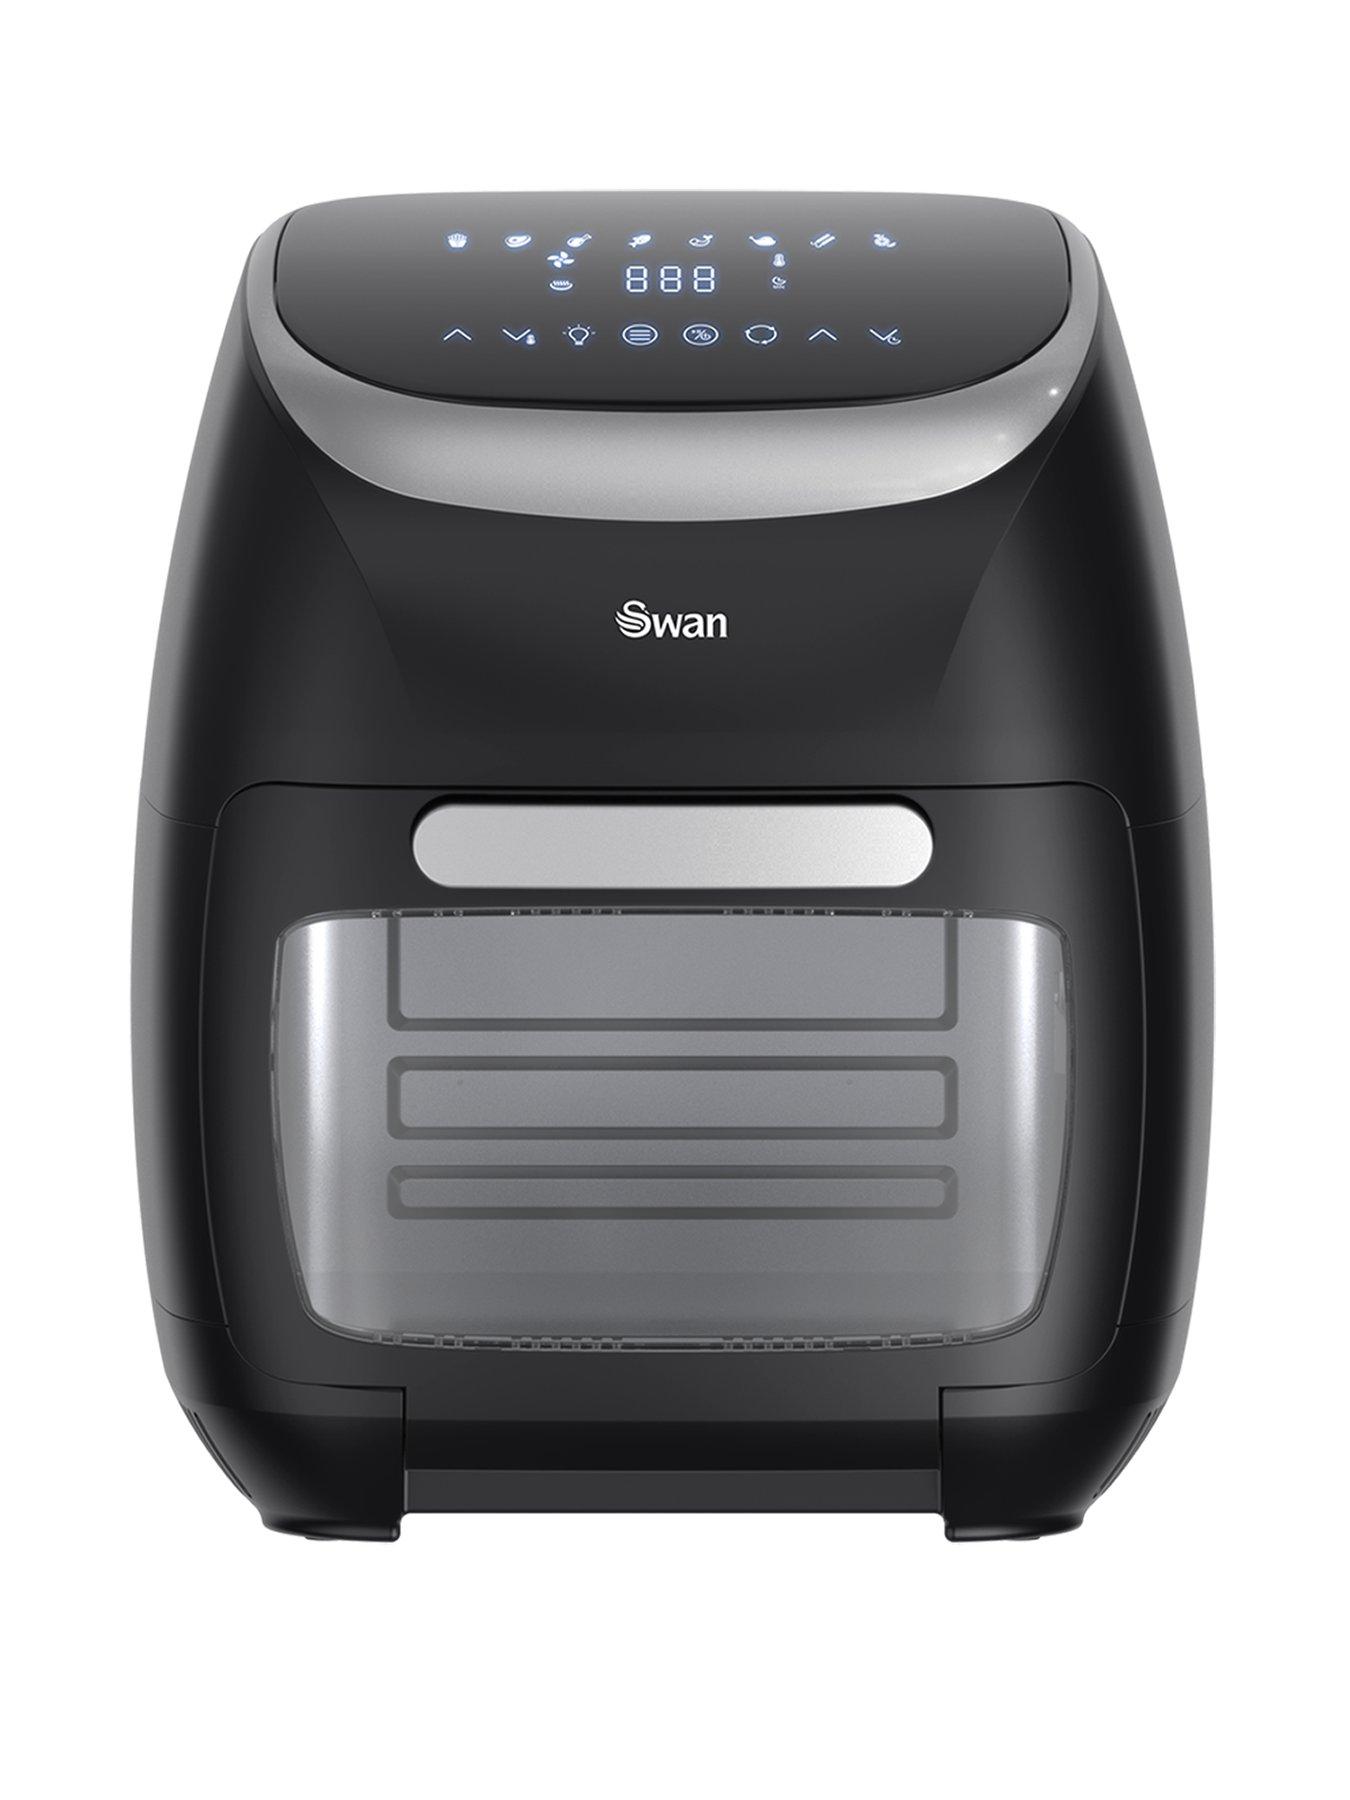 Swan Duo Digital Air Fryer review: it's a first for the brand